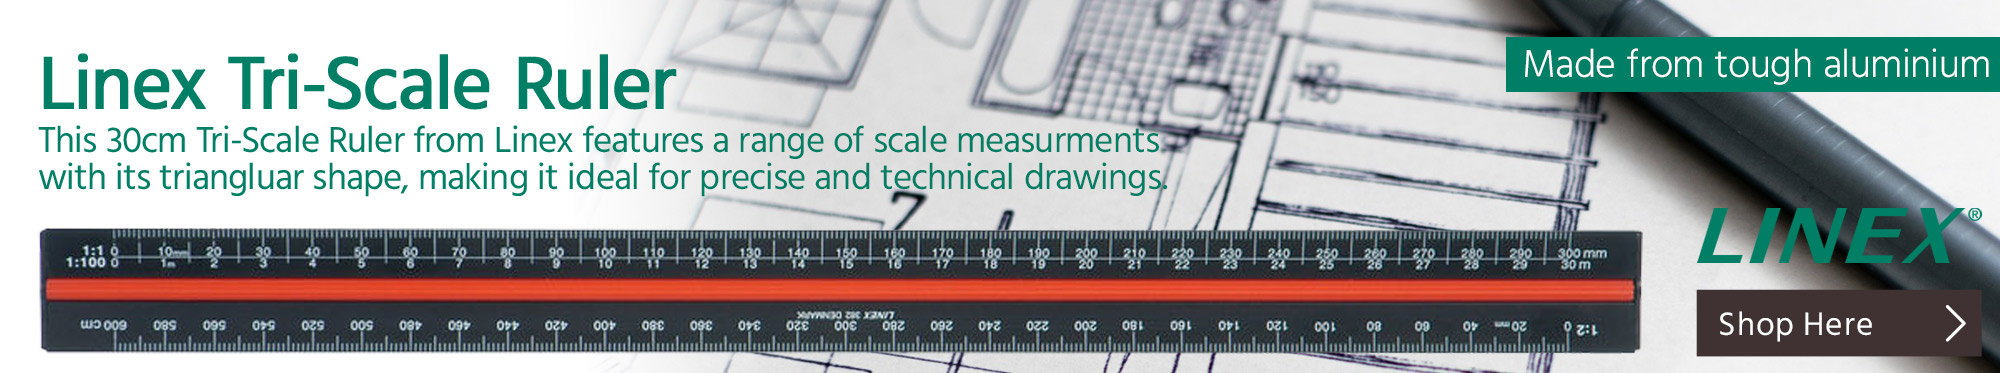 An Ideal Solution for Precise and Technical Drawings